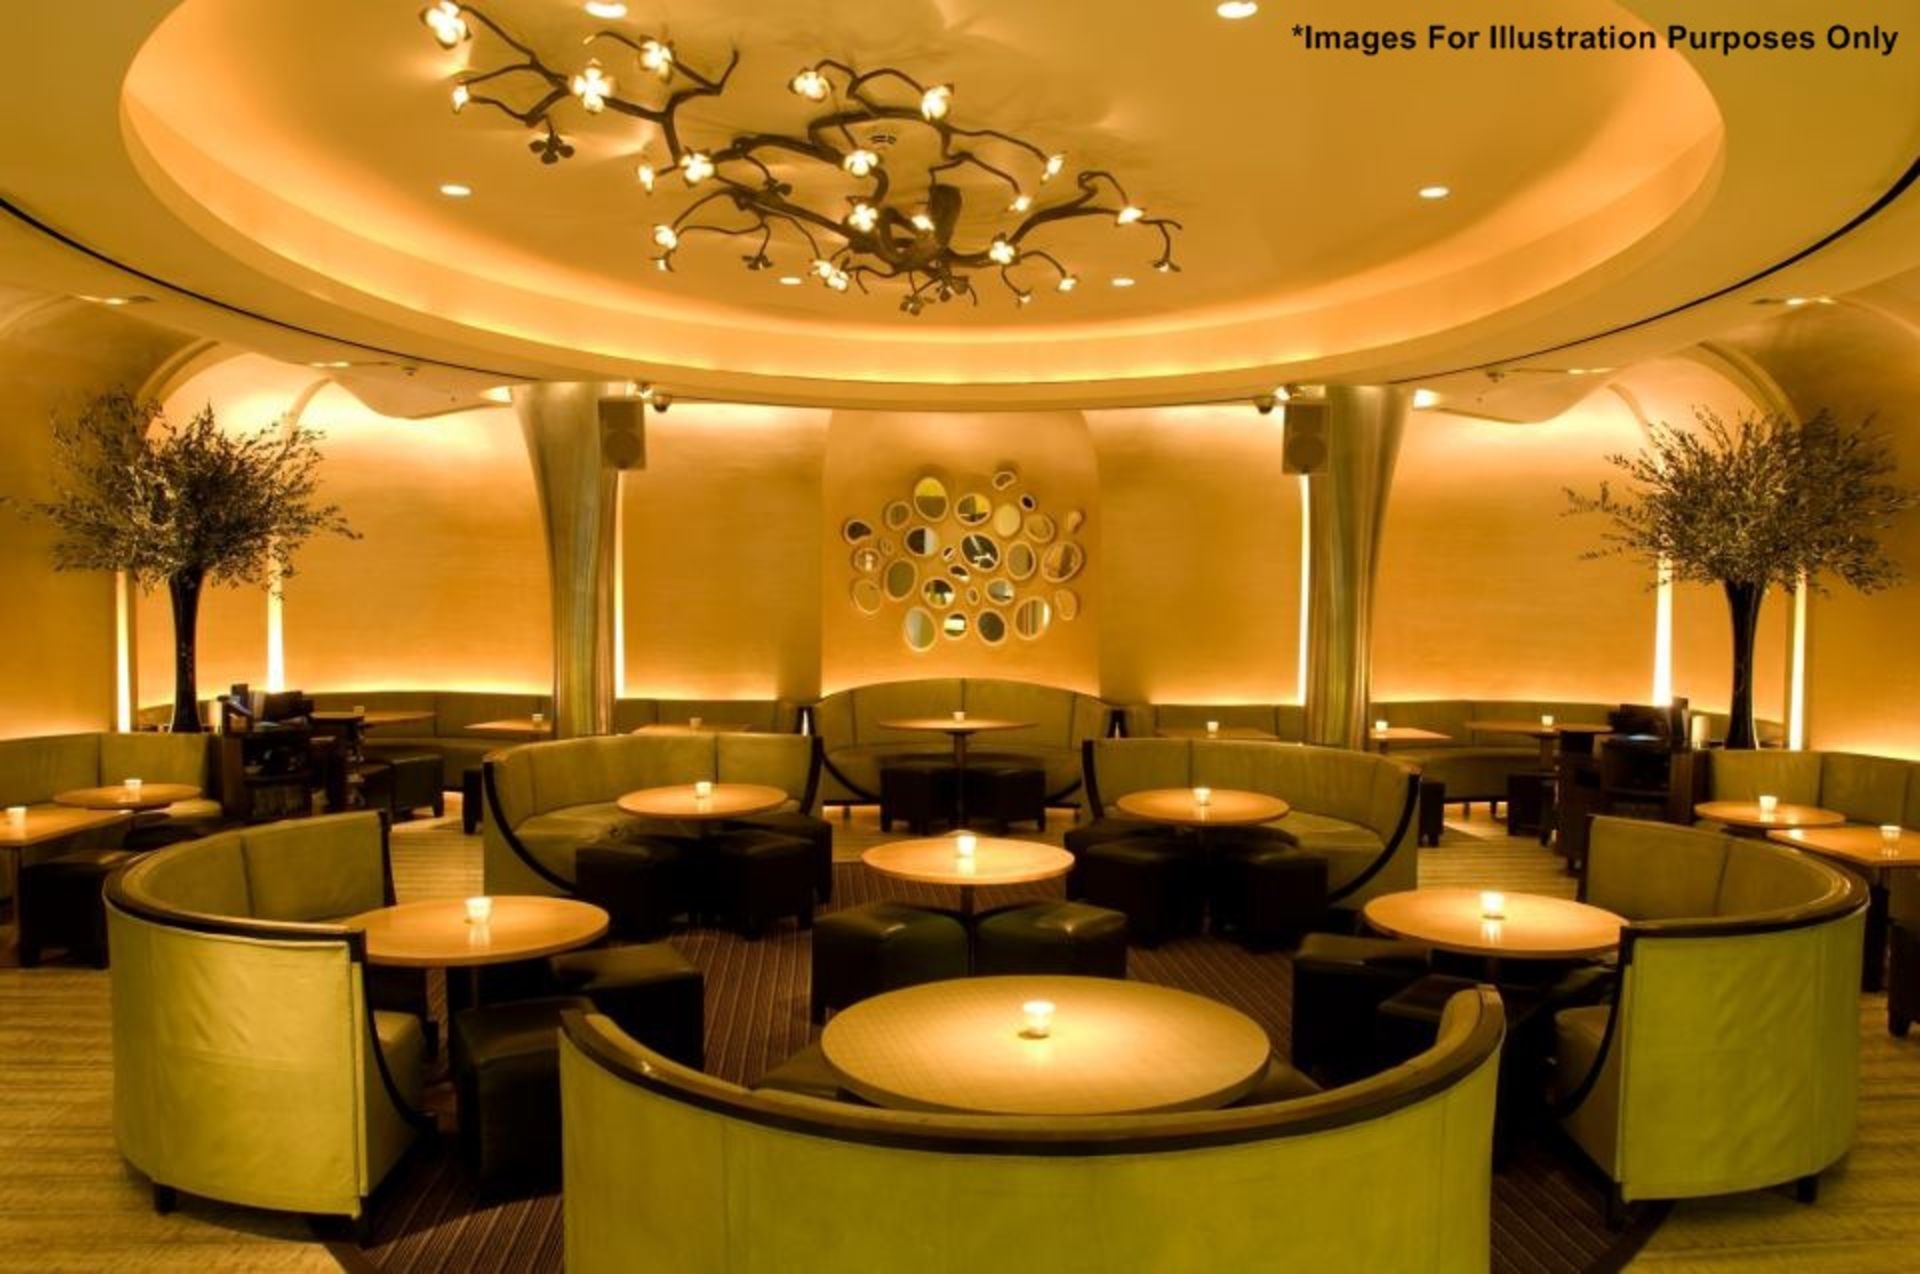 1 x Luxury Upholstered Curved Seating Area - Recently Removed From Nobu - Dimensions: W285 x D62cm x - Image 12 of 18